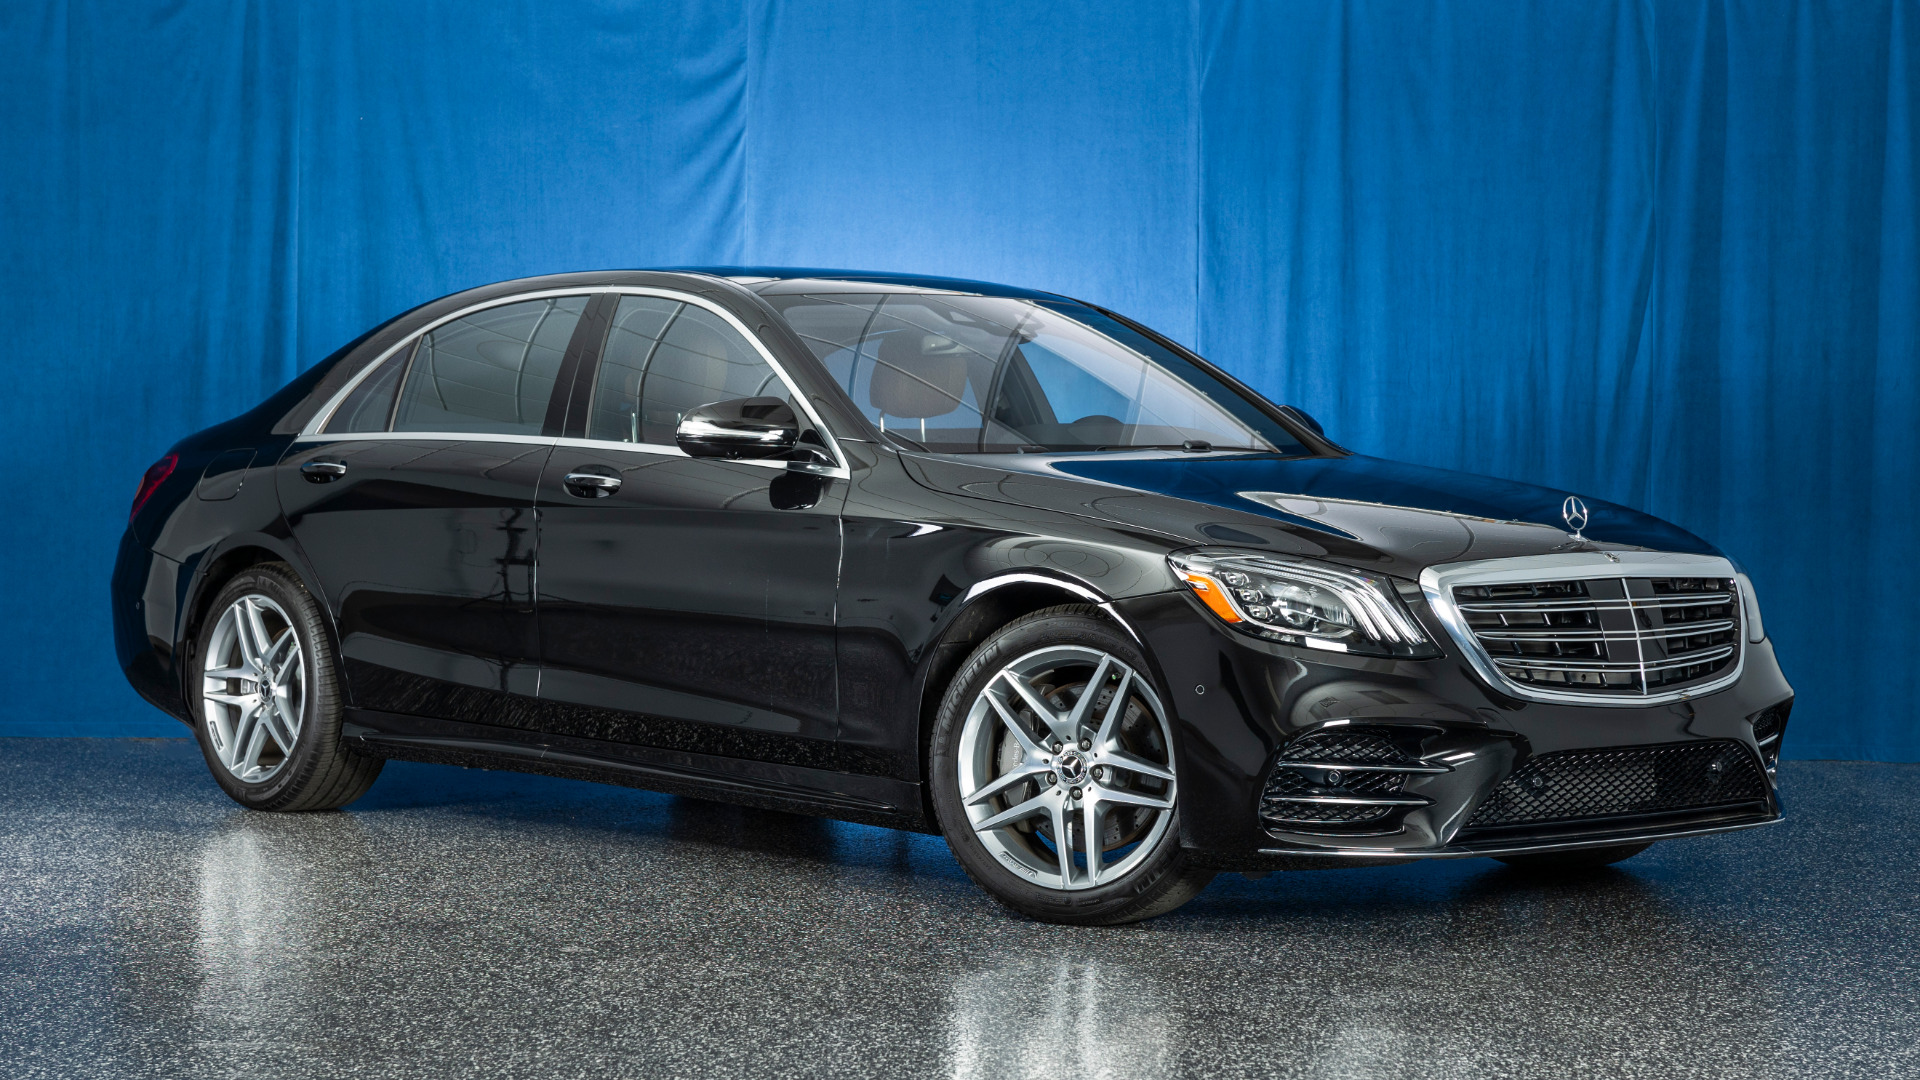 Used 2020 Mercedes-Benz S-Class S 560 For Sale ($92,500) | Reggia 